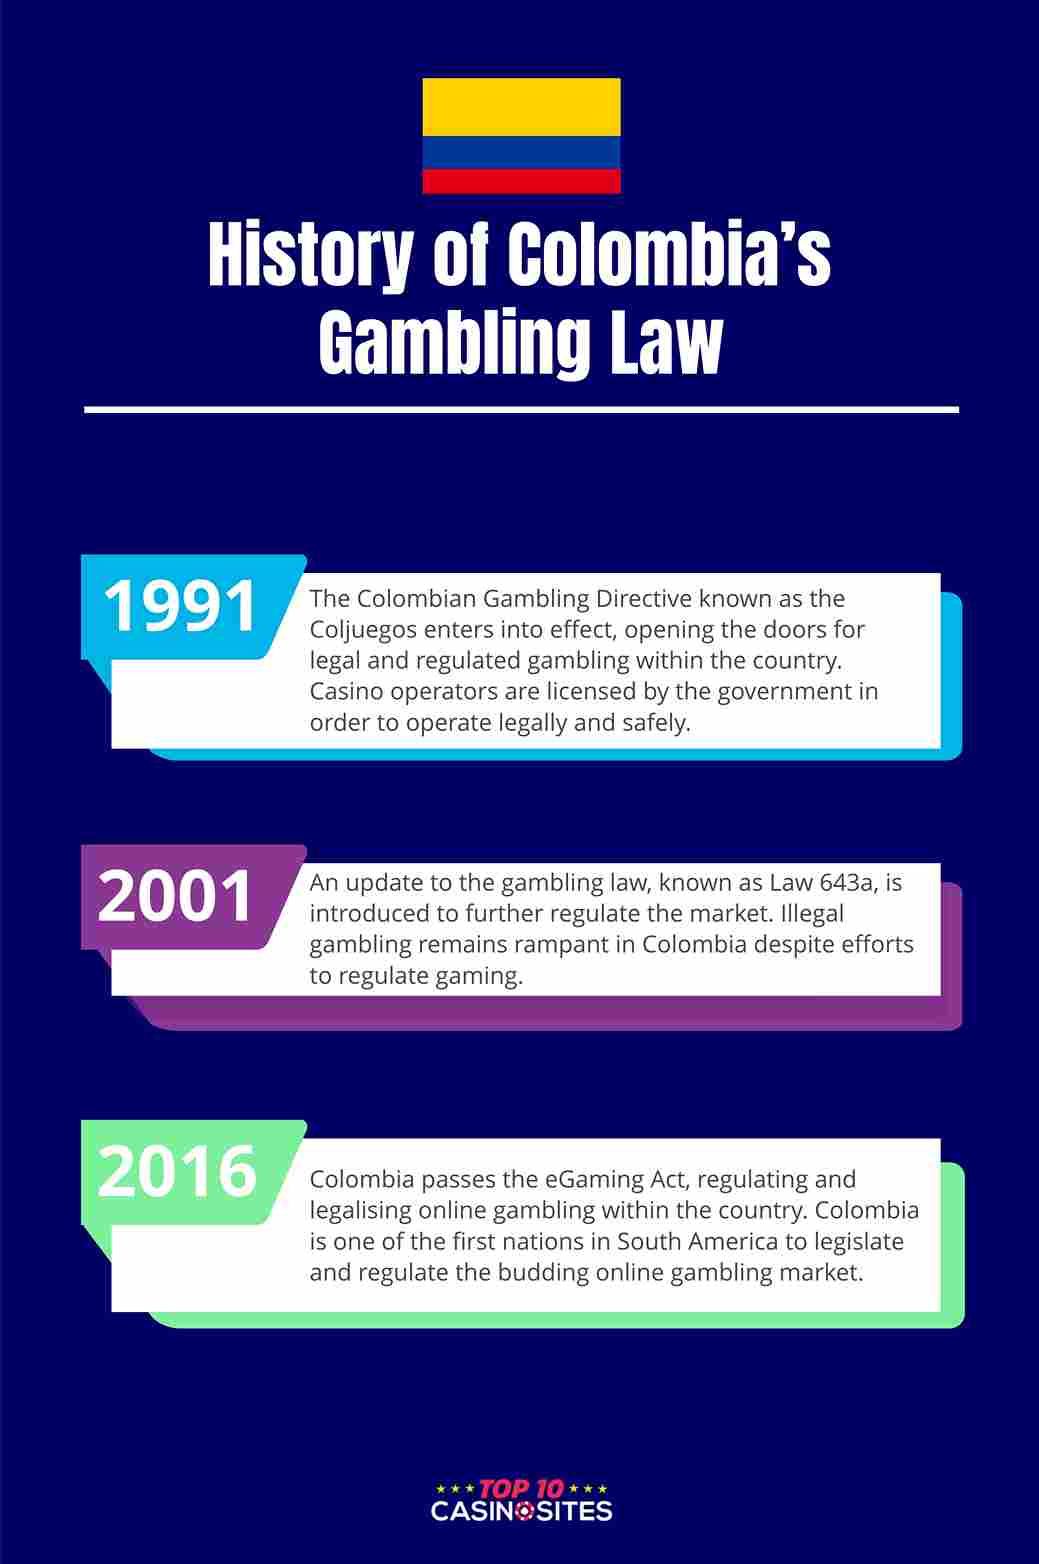 An infographic that outlines the history of gambling laws in Colombia